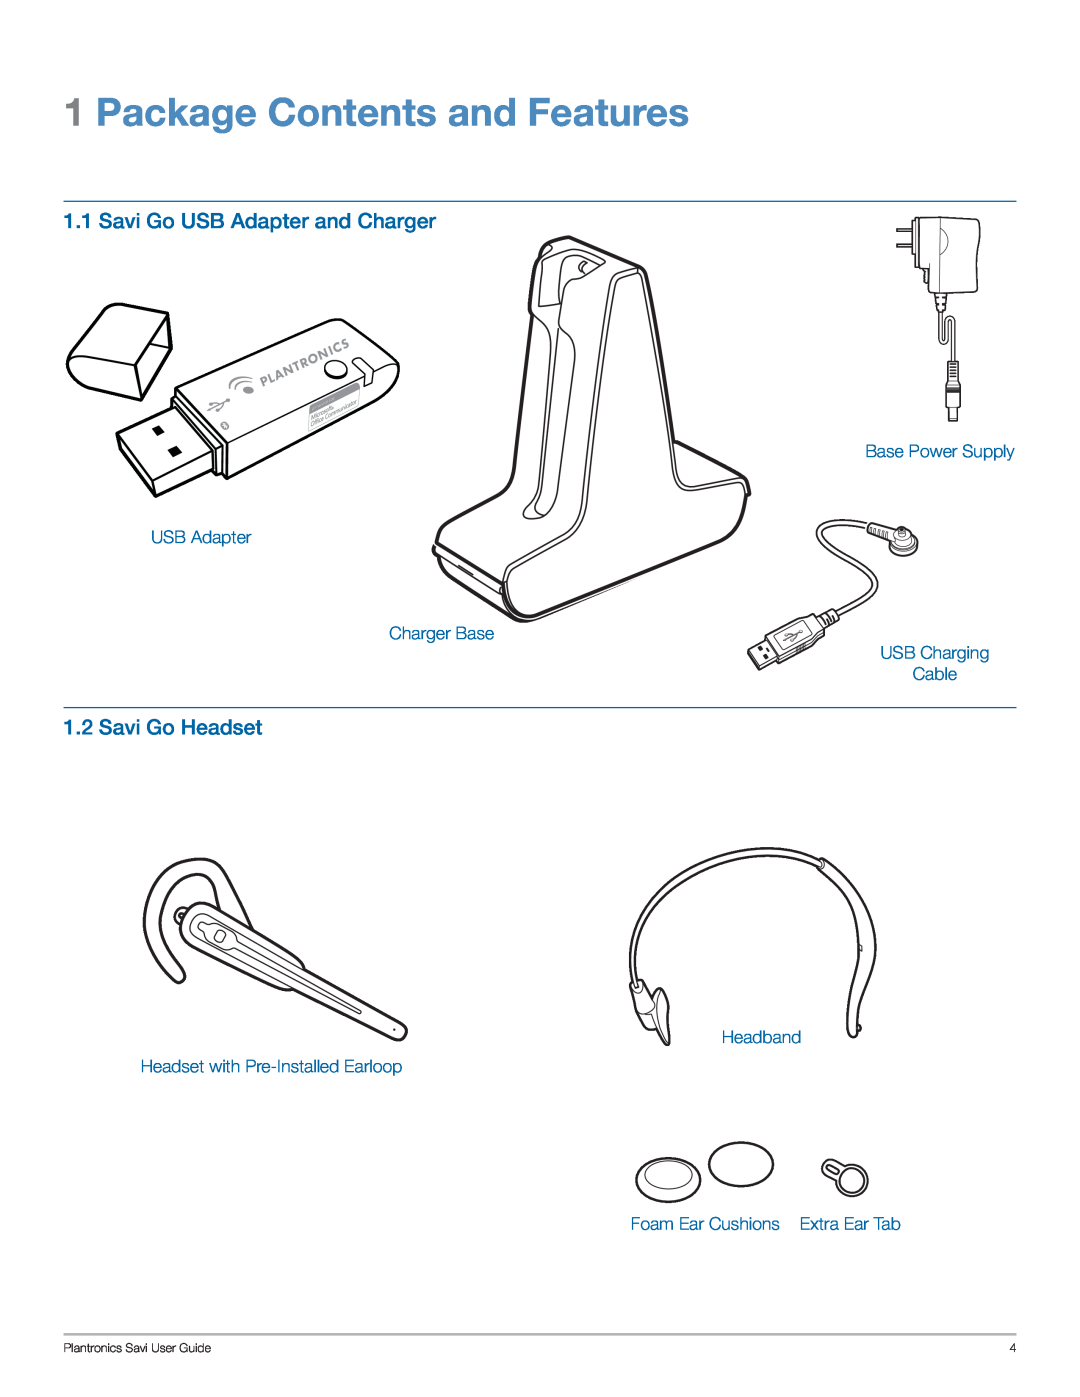 Plantronics WG101/B Package Contents and Features, Savi Go USB Adapter and Charger, Savi Go Headset, USB Charging Cable 